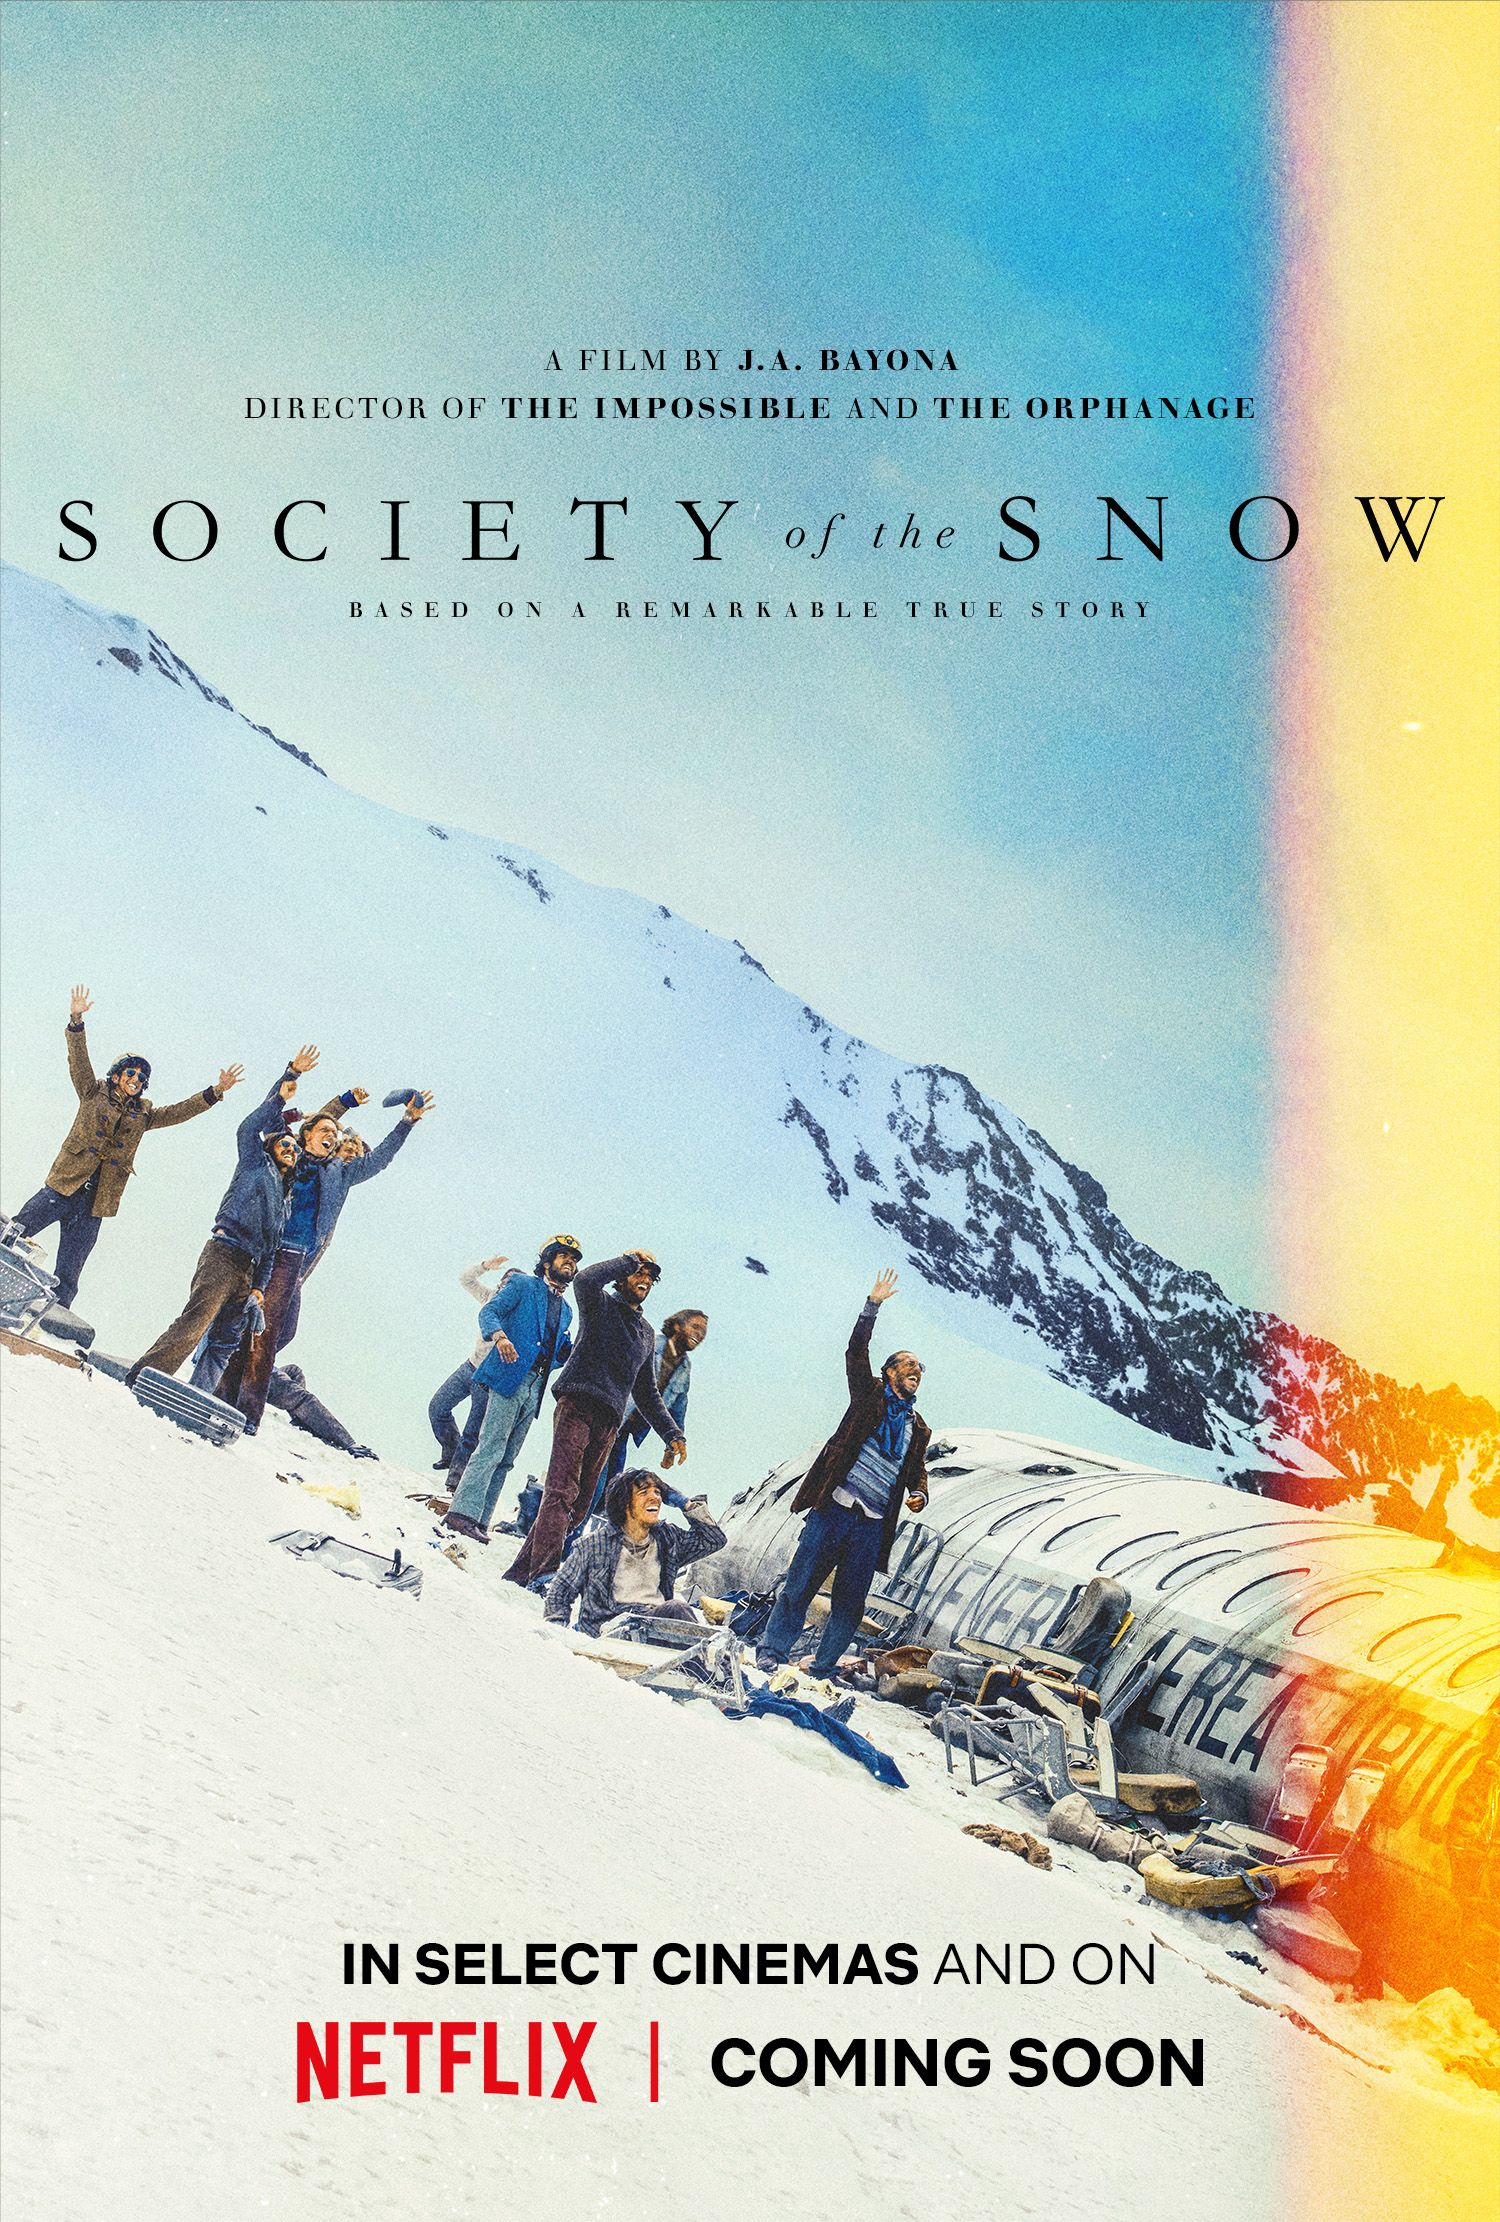 The poster for Society of the Snow